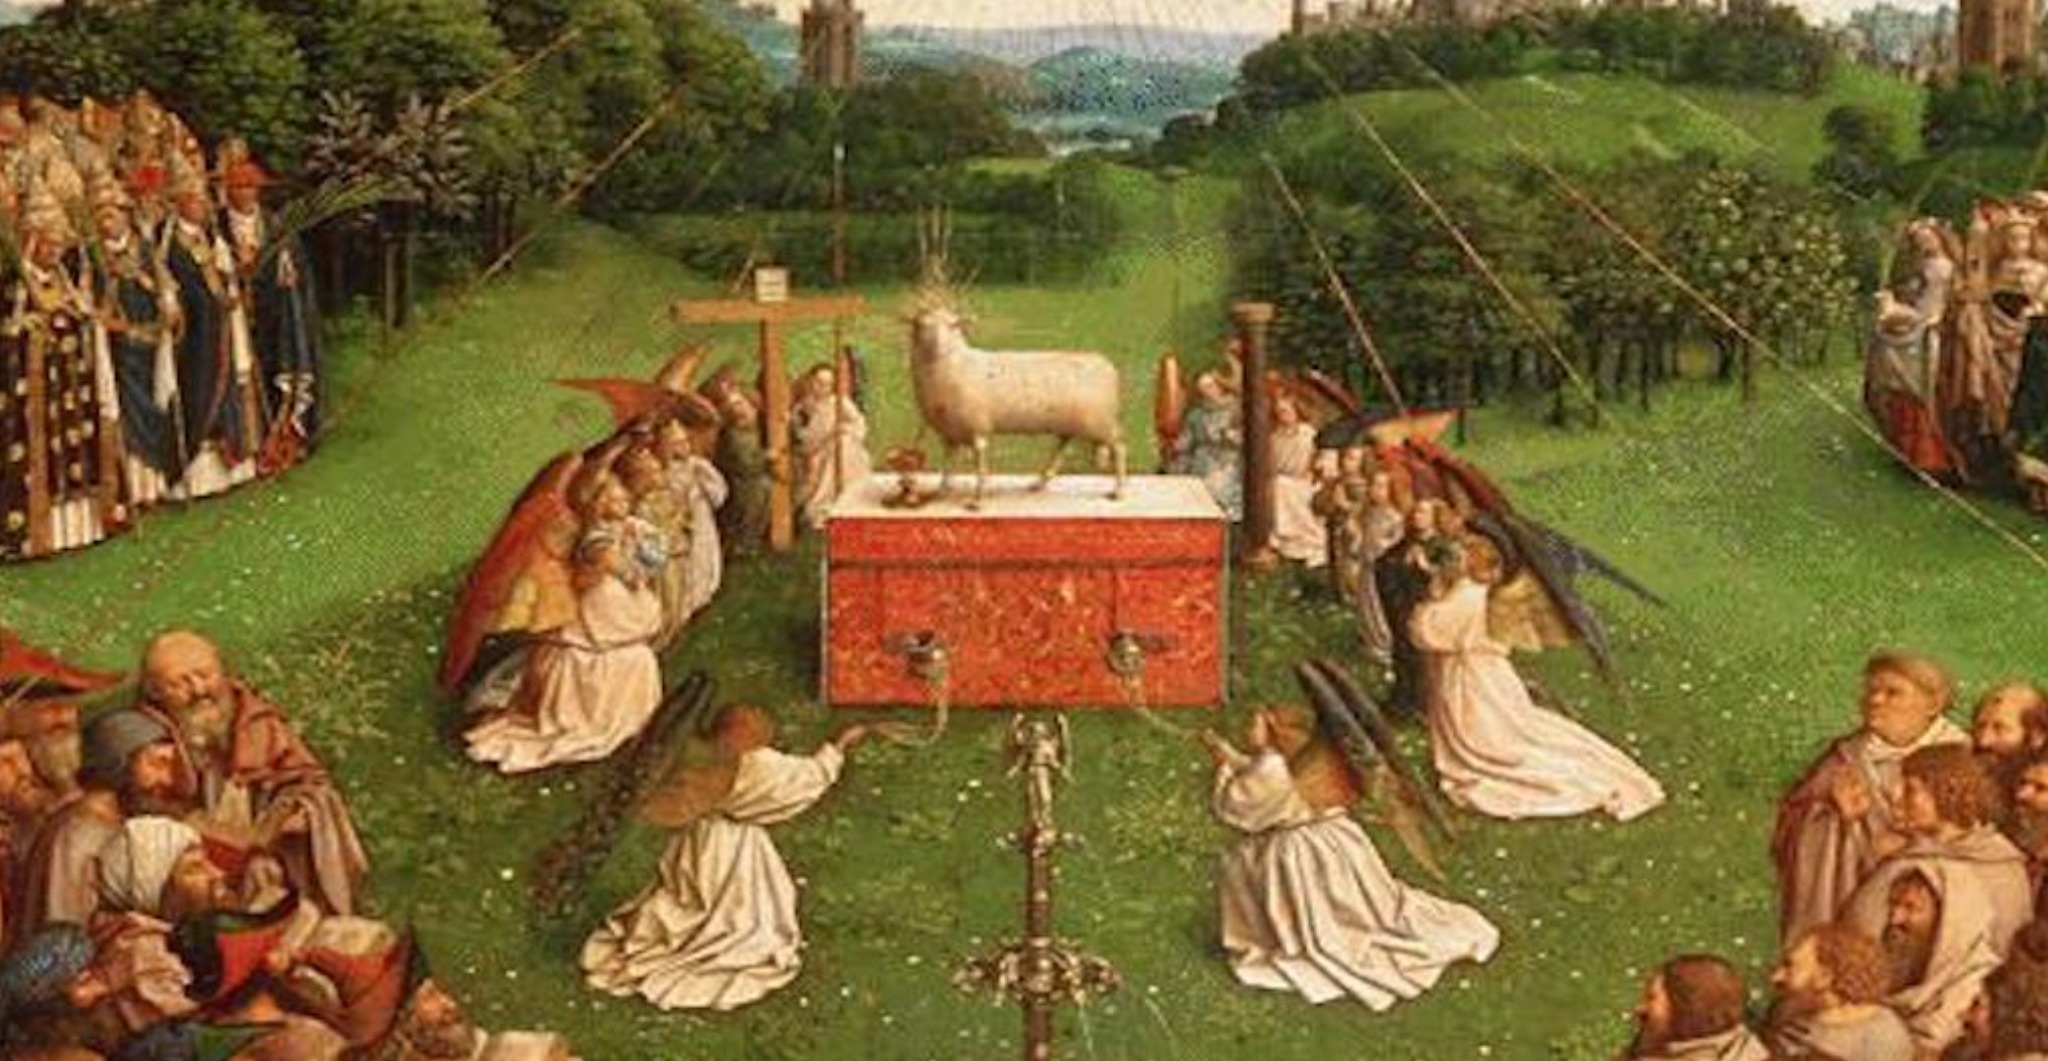 Section of the Adoration of the Lamb panel of the Ghent altarpiece.